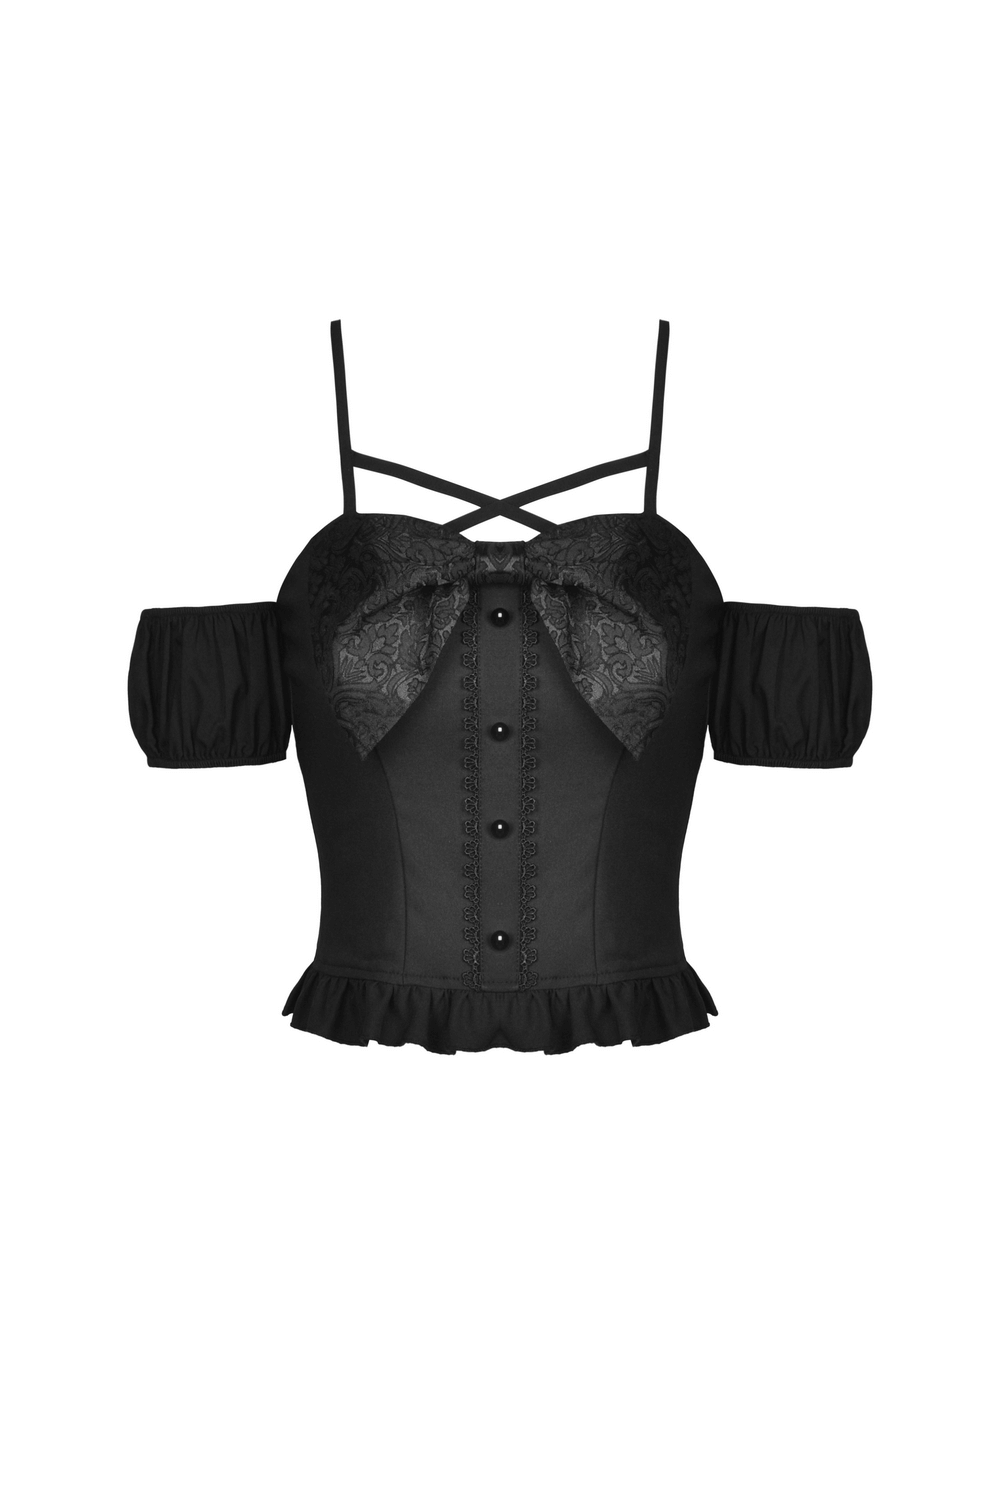 Elegant Gothic Lolita Bowknot Crop Top With Straps